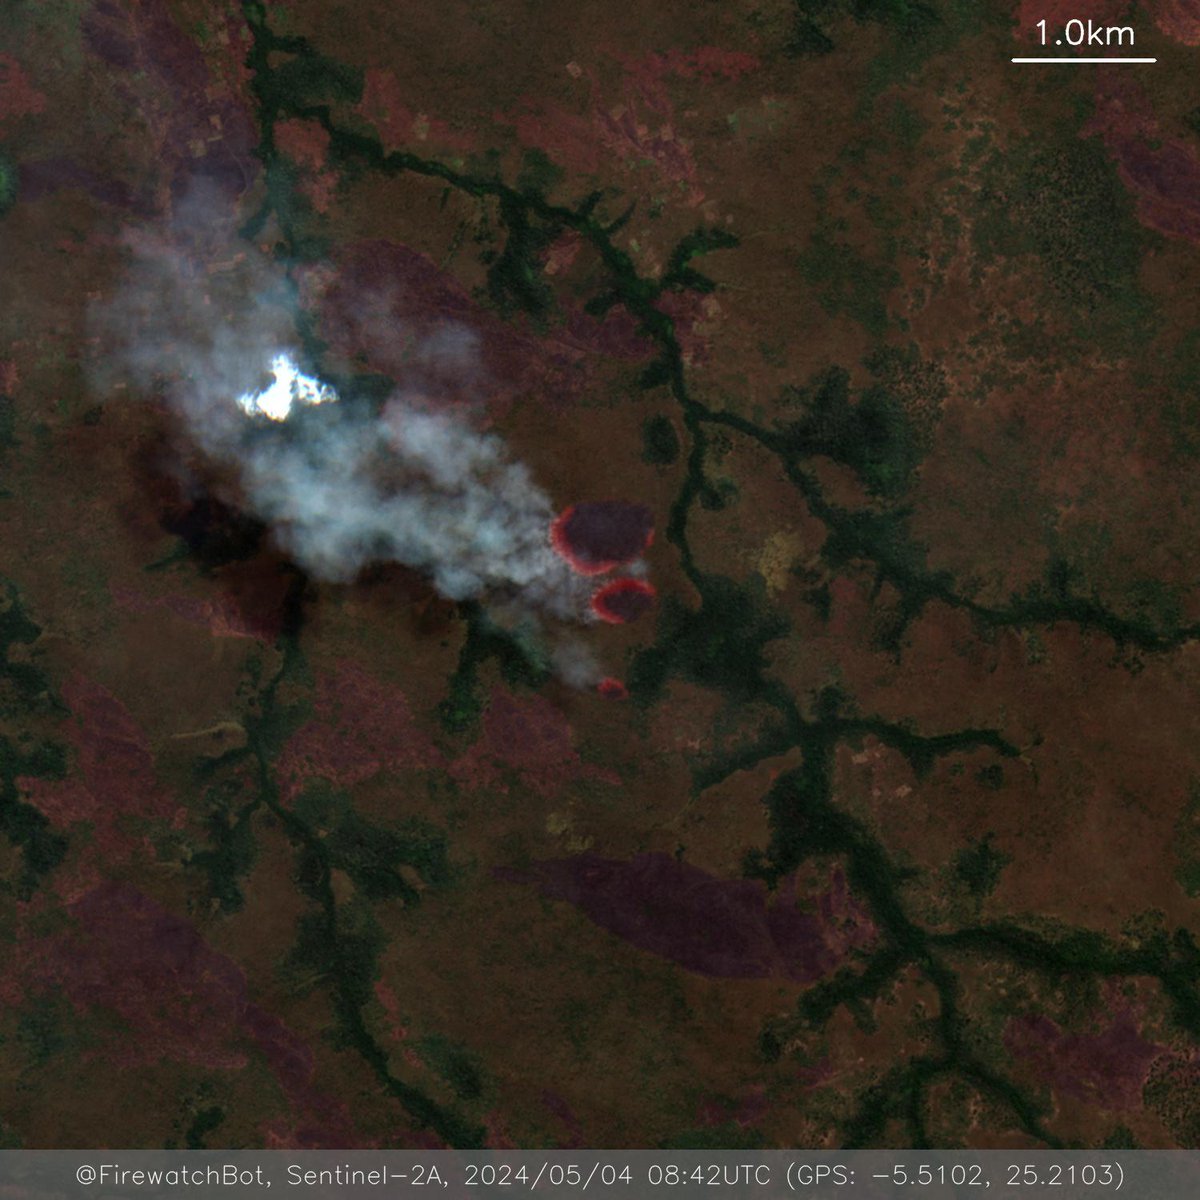 Fire detected from #Sentinel2

🗺 Place: Lubao, Lomami, #DemocraticRepublicoftheCongo
🕛 Date: 2024/05/04 08:42UTC

View location: maps.google.com/?q=-5.51020991… (-5.5102, 25.2103)